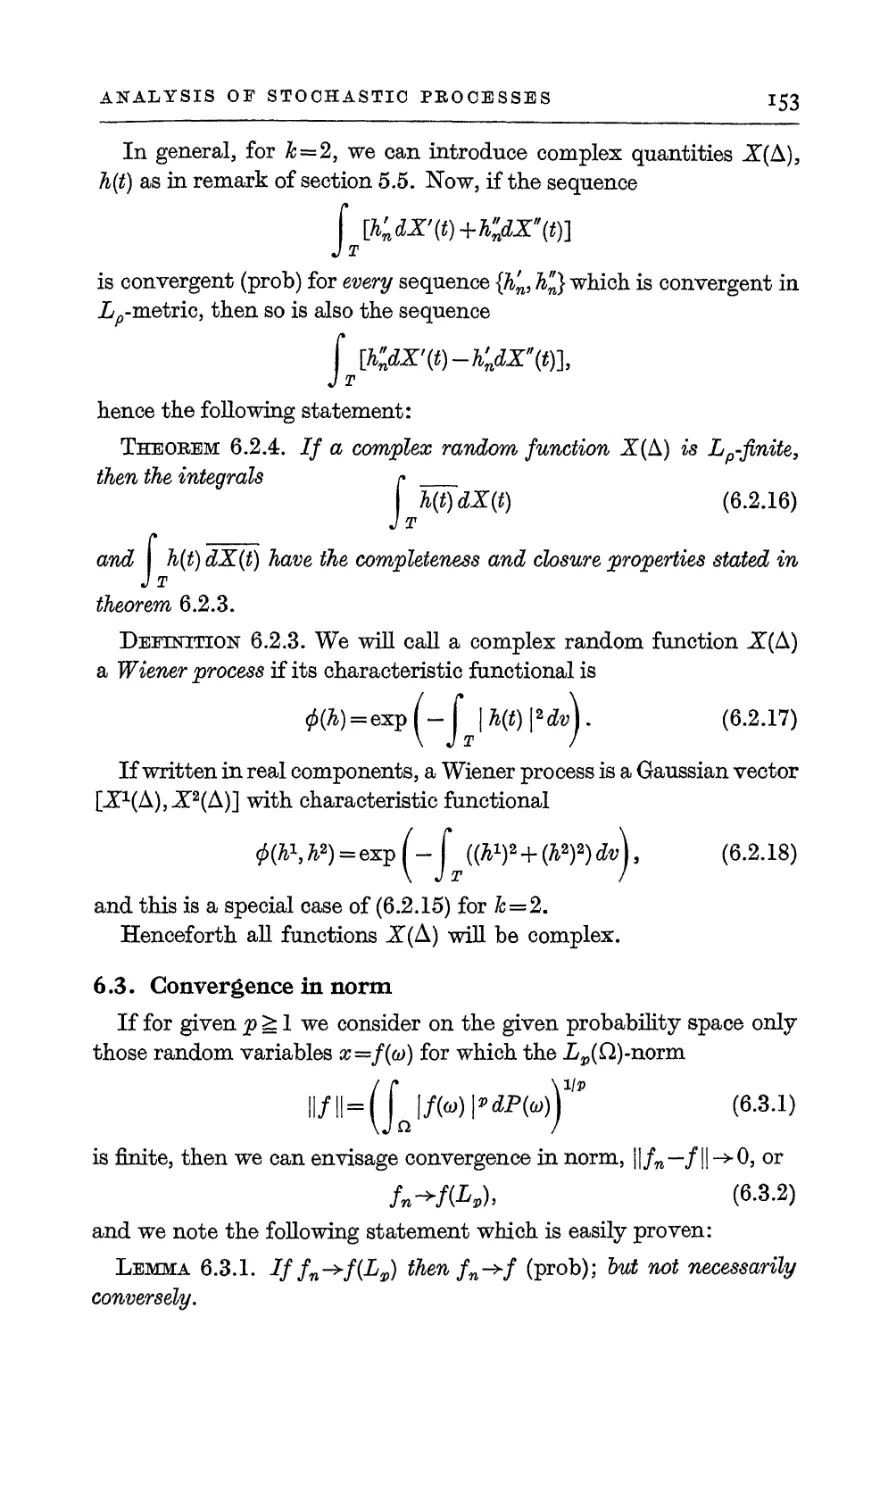 6.3. Convergence in norm